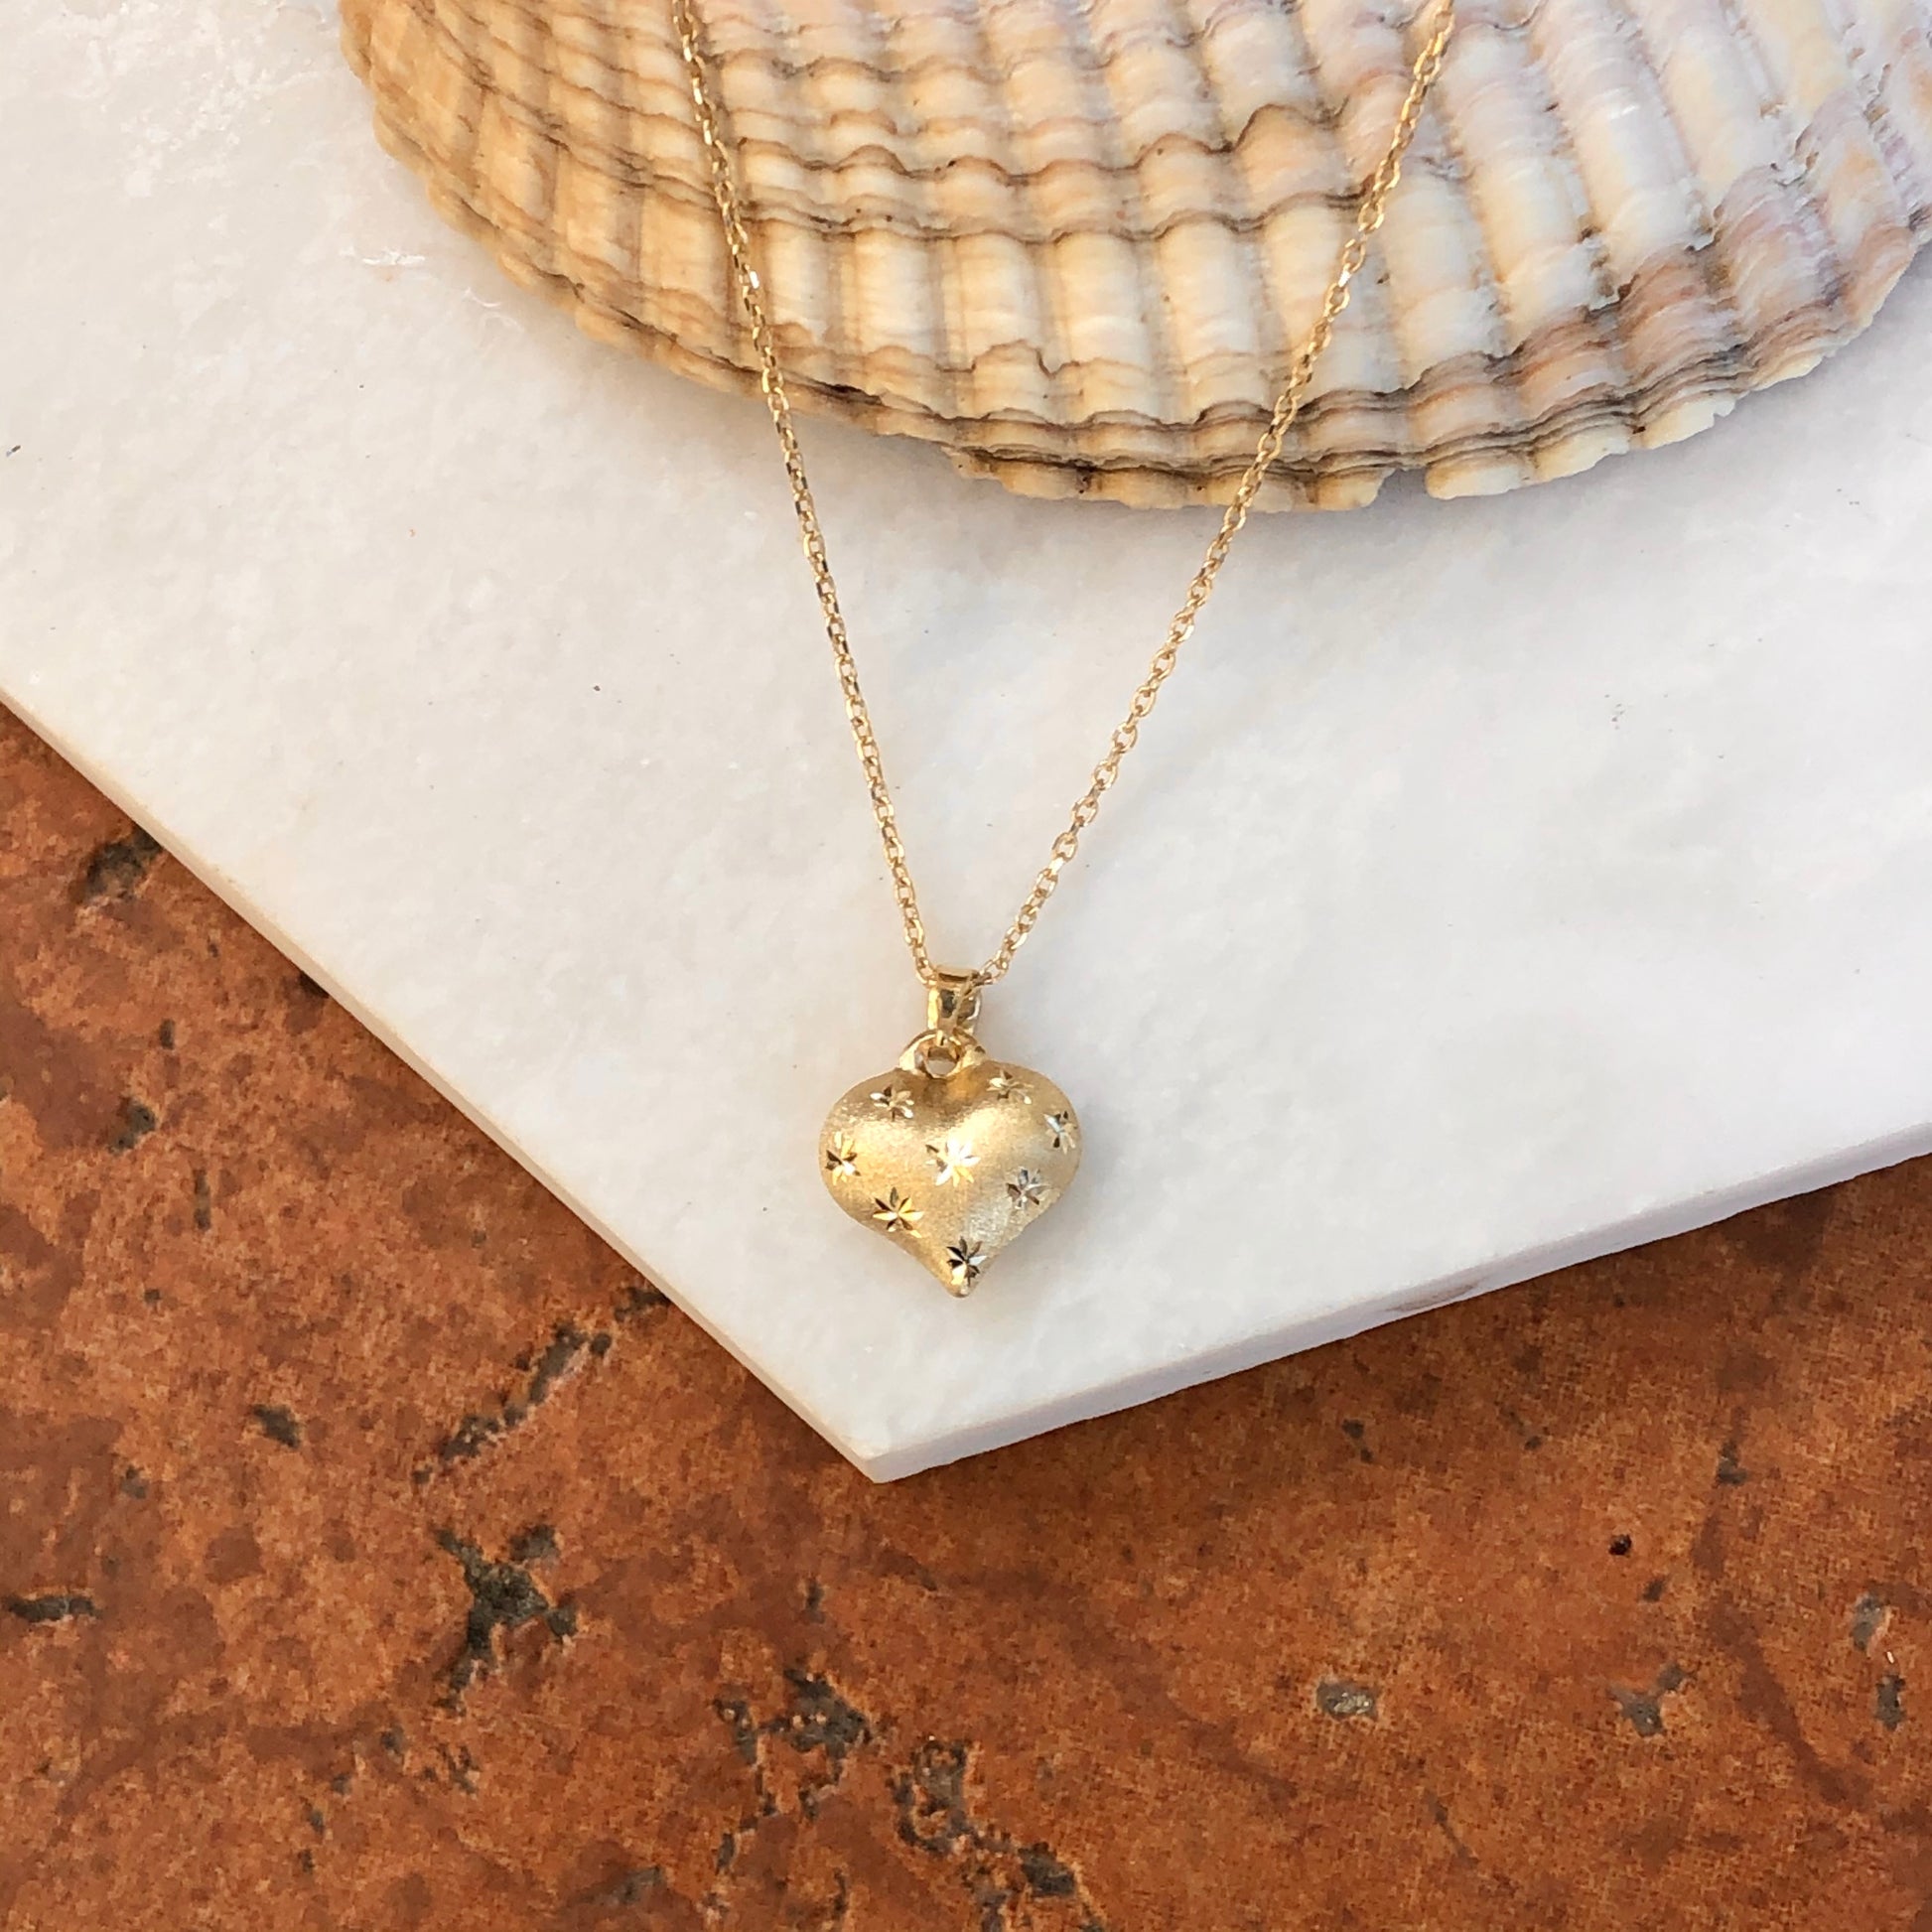 14kt Gold Puffed Heart Charm for Sale